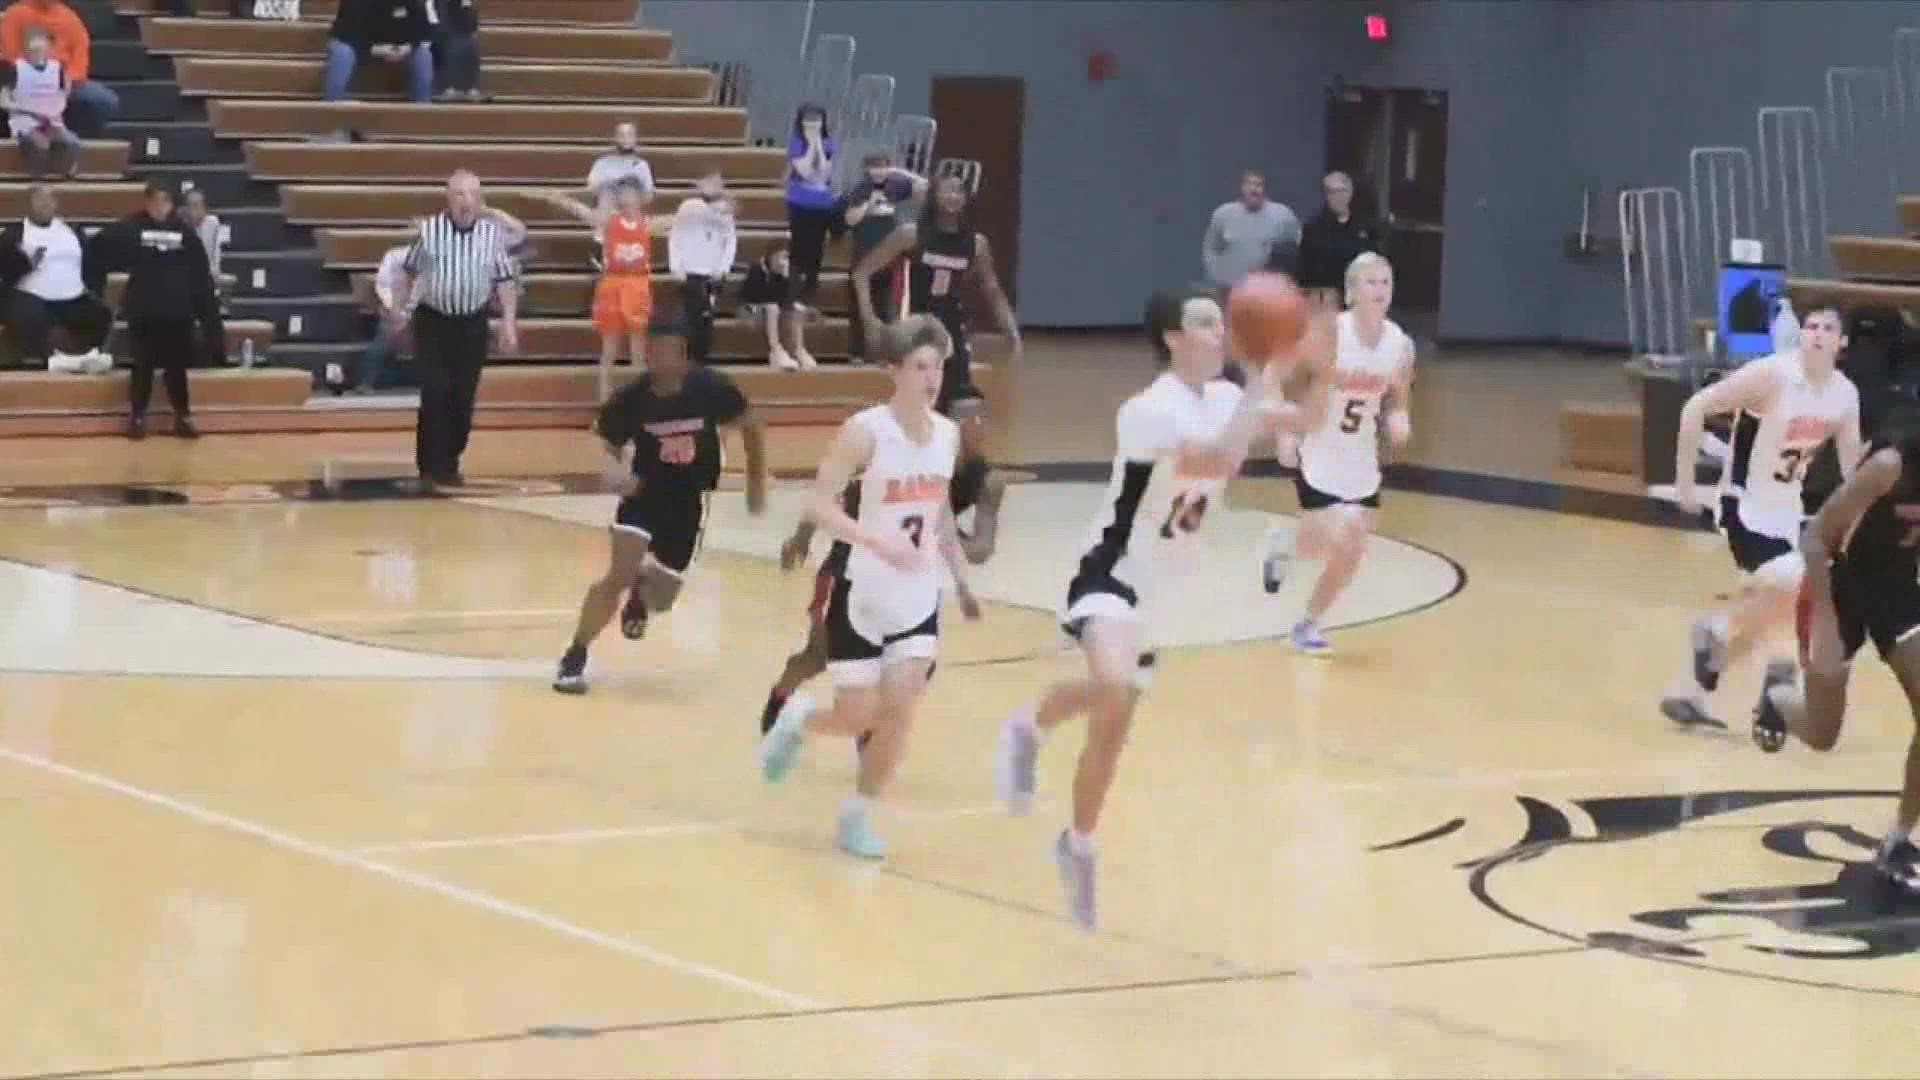 I still can't believe it', Rockford sophomore makes amazing buzzer-beater  shot